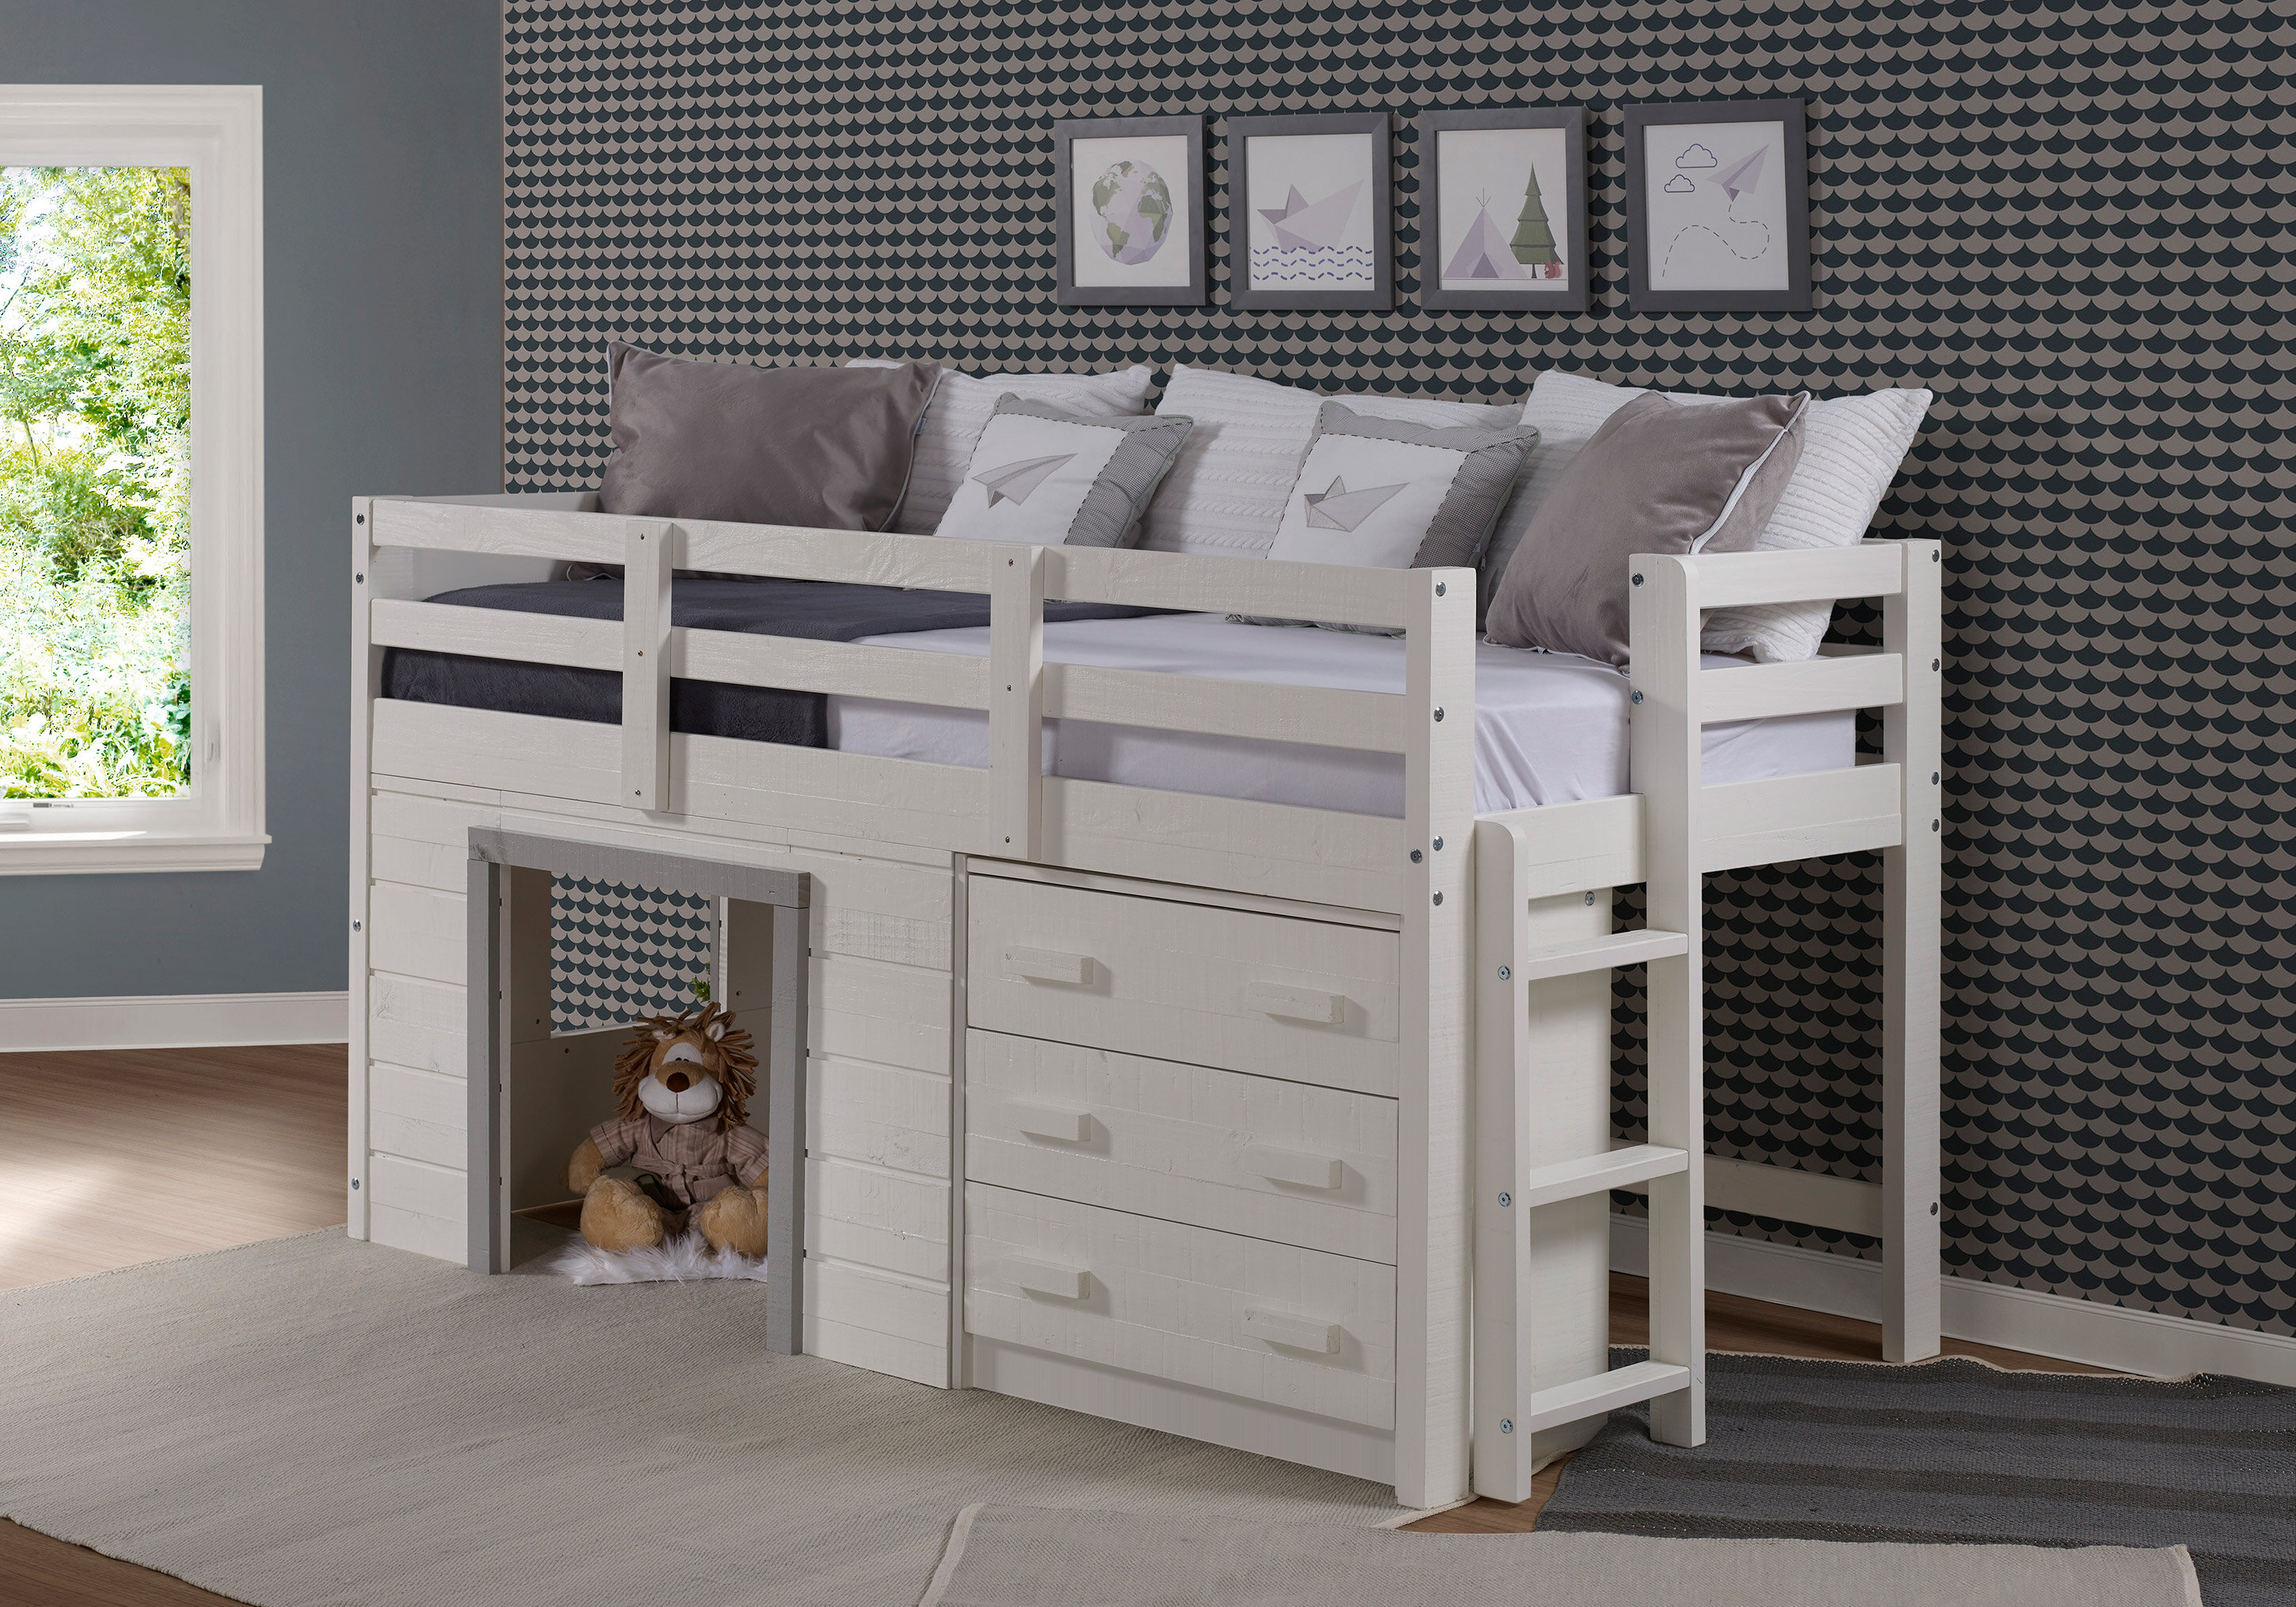 Harriet Bee Tressa Twin Low Loft Bed With Drawers And Shelves